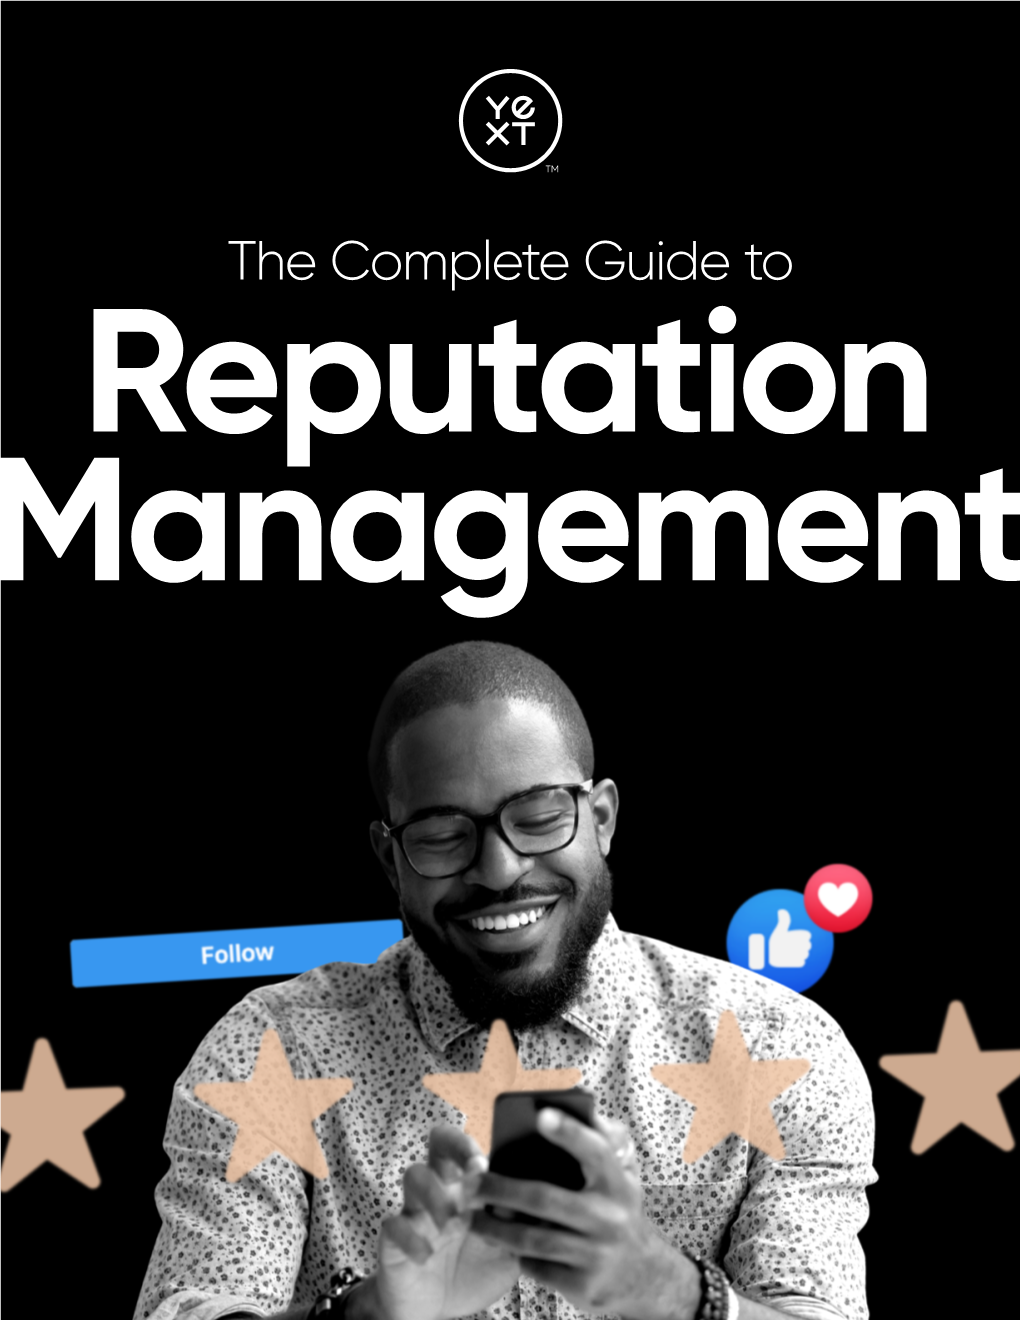 The Complete Guide to Reputation Management Two Summers Ago, a Foreign Exchange Student from Sweden Lived with My Family for the Summer